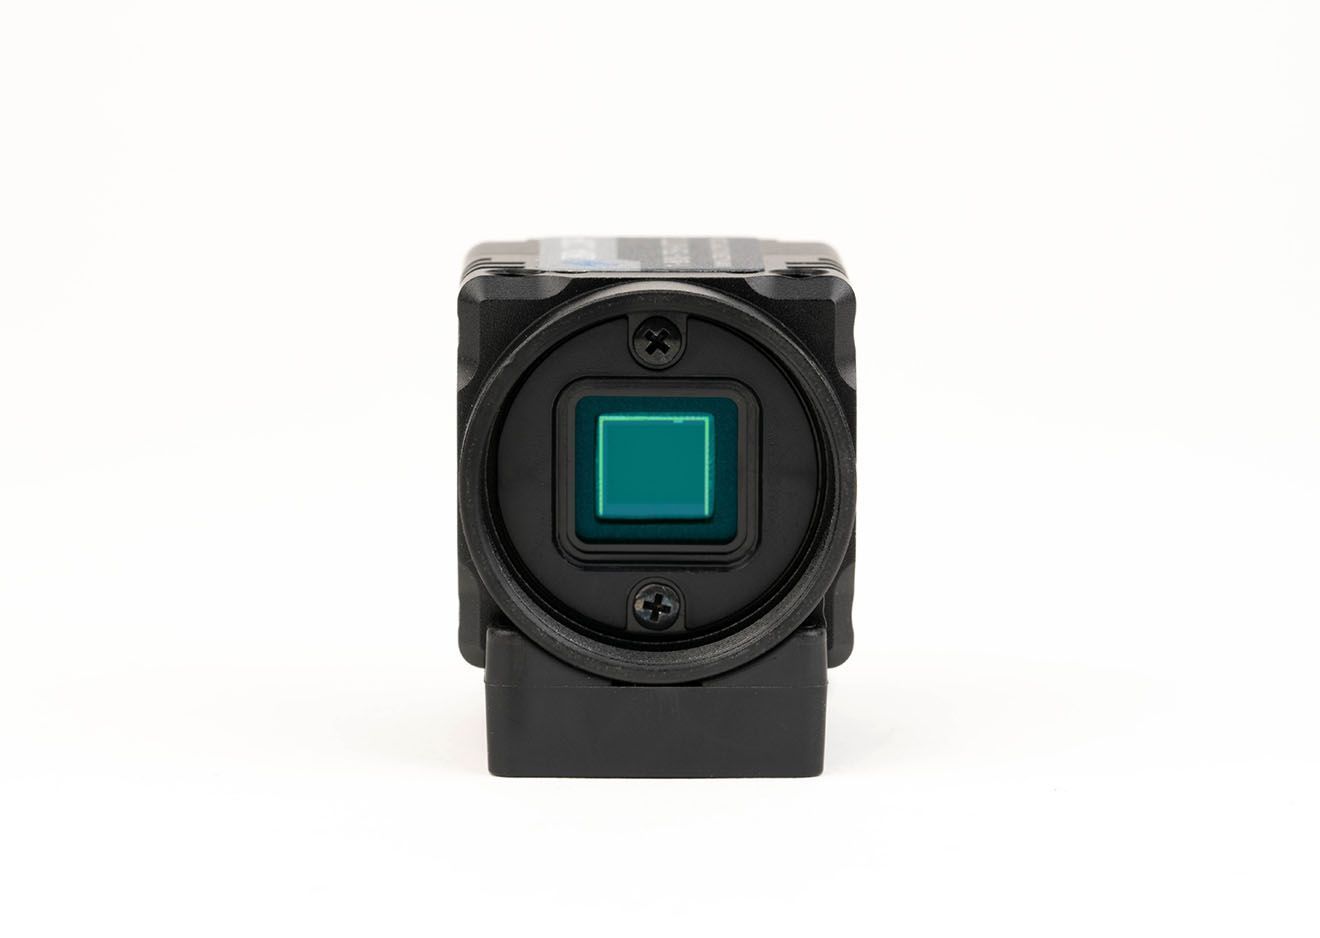 A black camera with a green square in the middle on a white background.